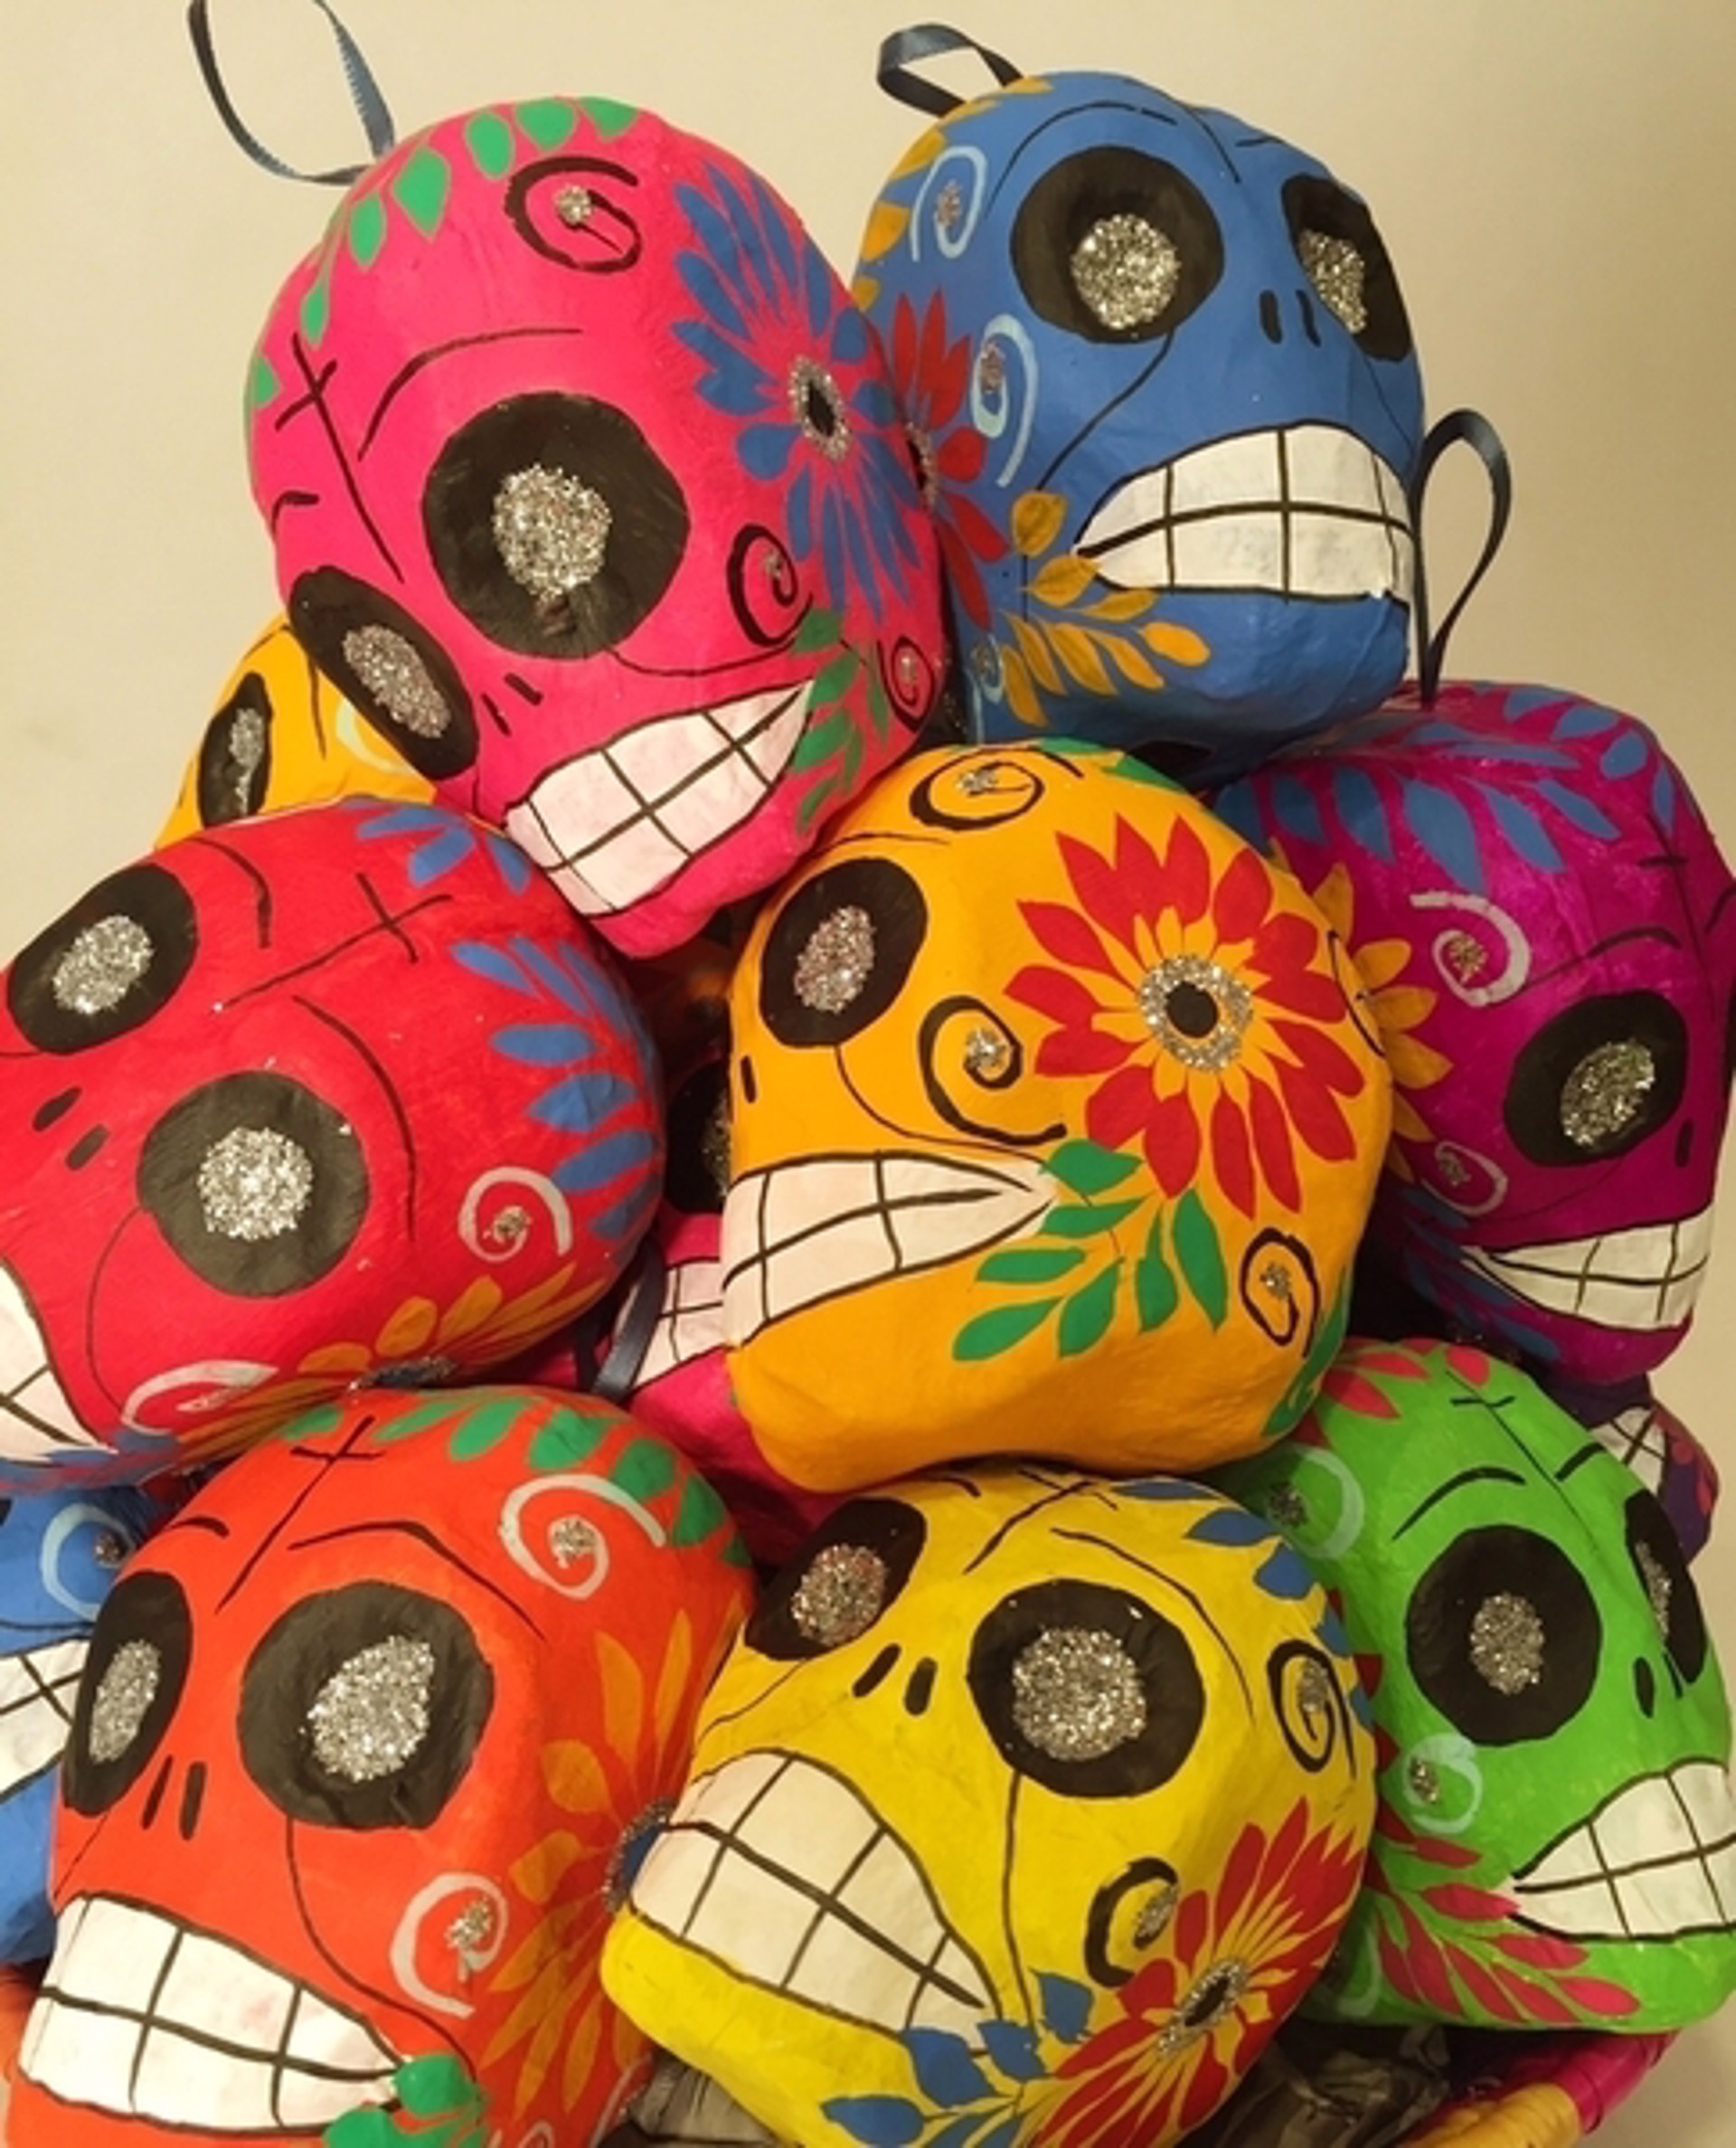 Ornament - Handcrafted Sugar Skull, Assorted Designs by Indigo Desert Ranch - Day of the Dead